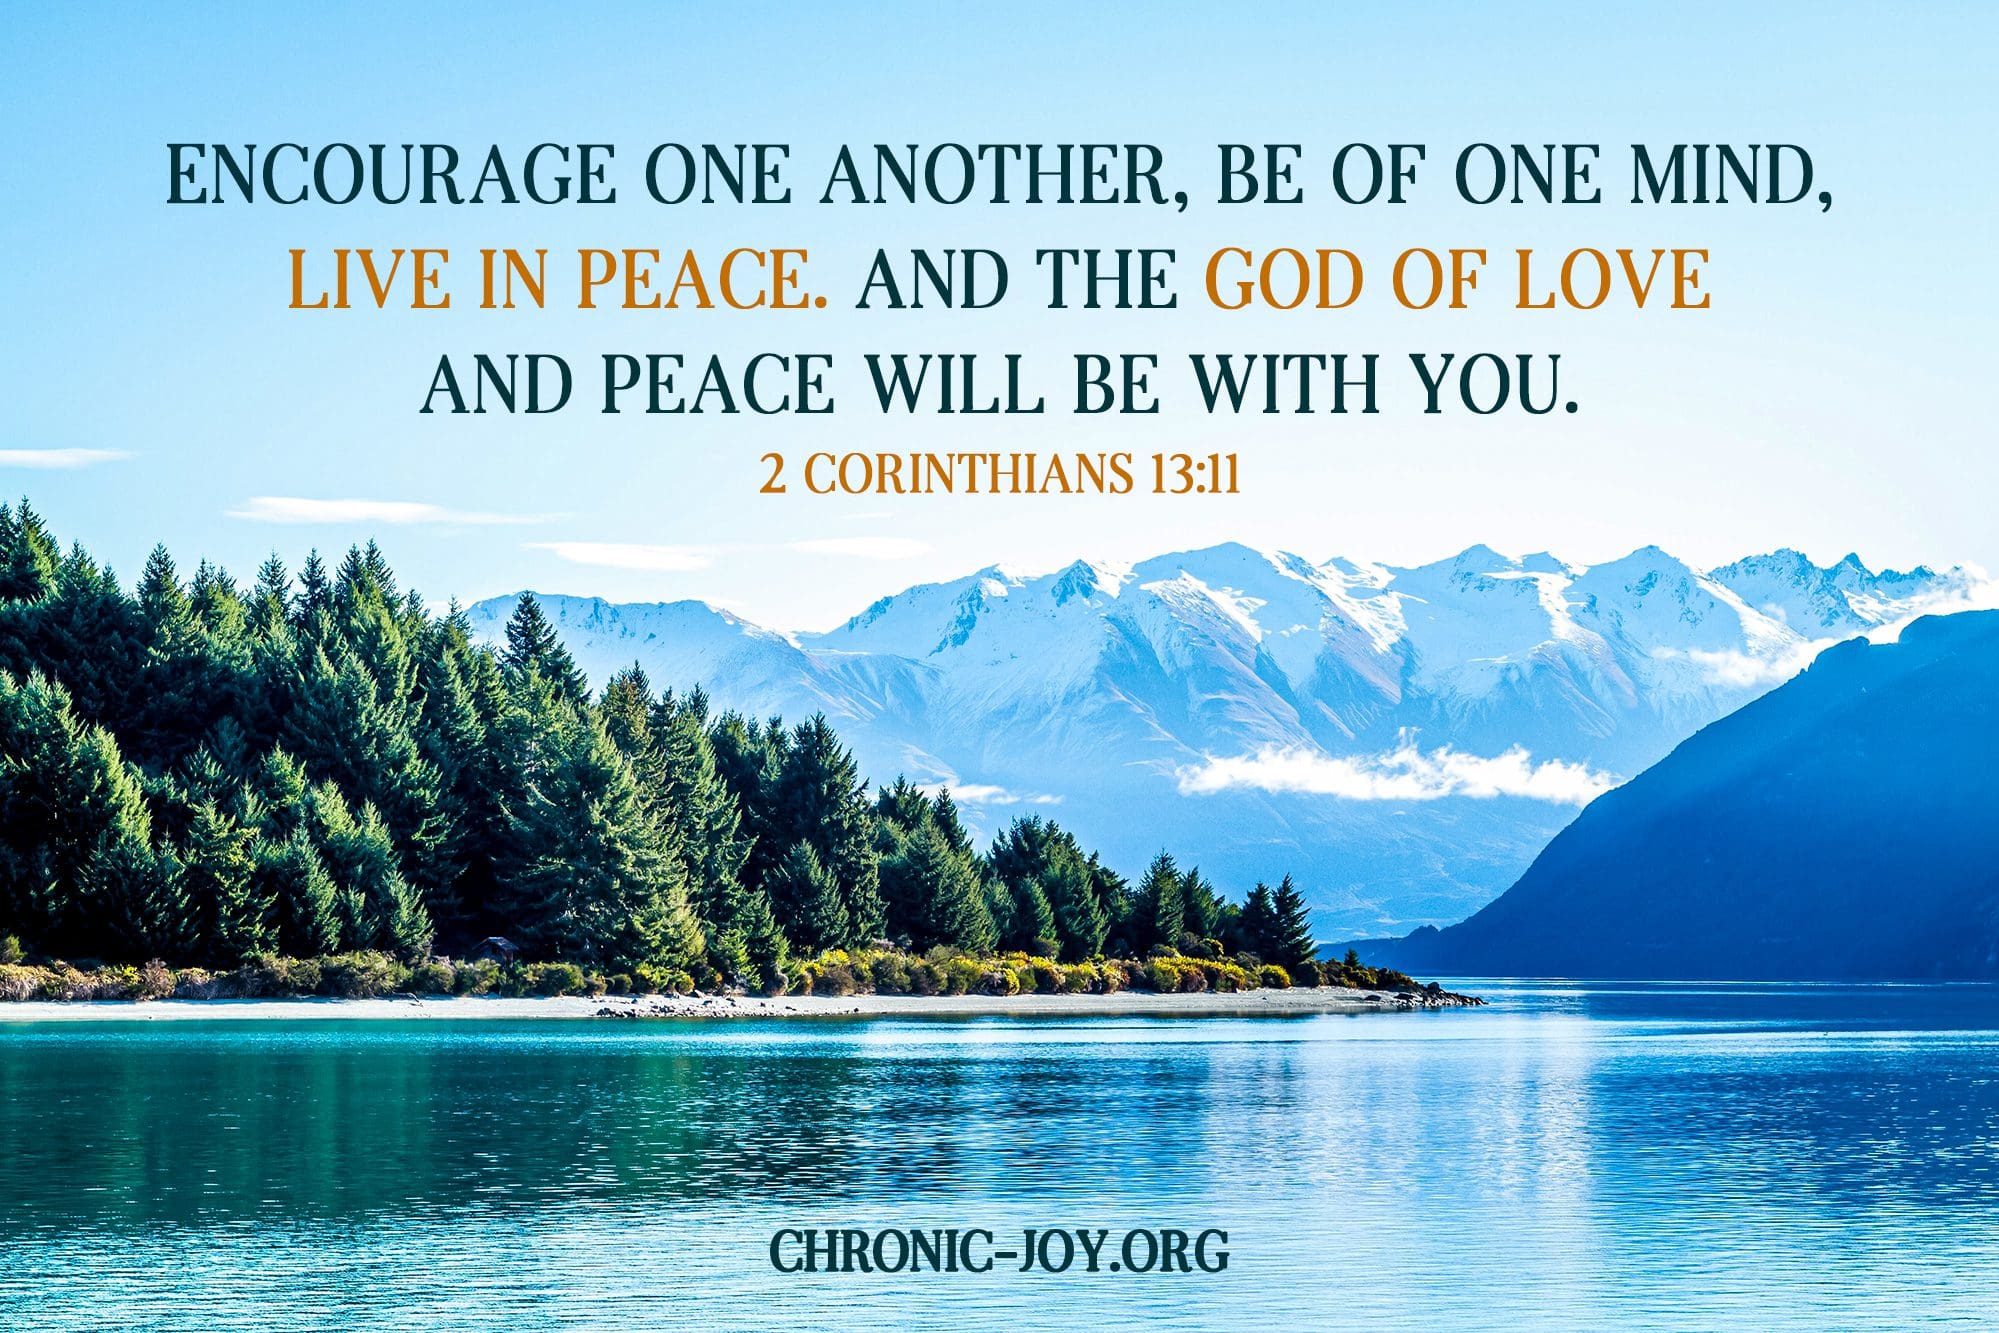 "... encourage one another, be of one mind, live in peace. And the God of love and peace will be with you." 2 Corinthians 13:11